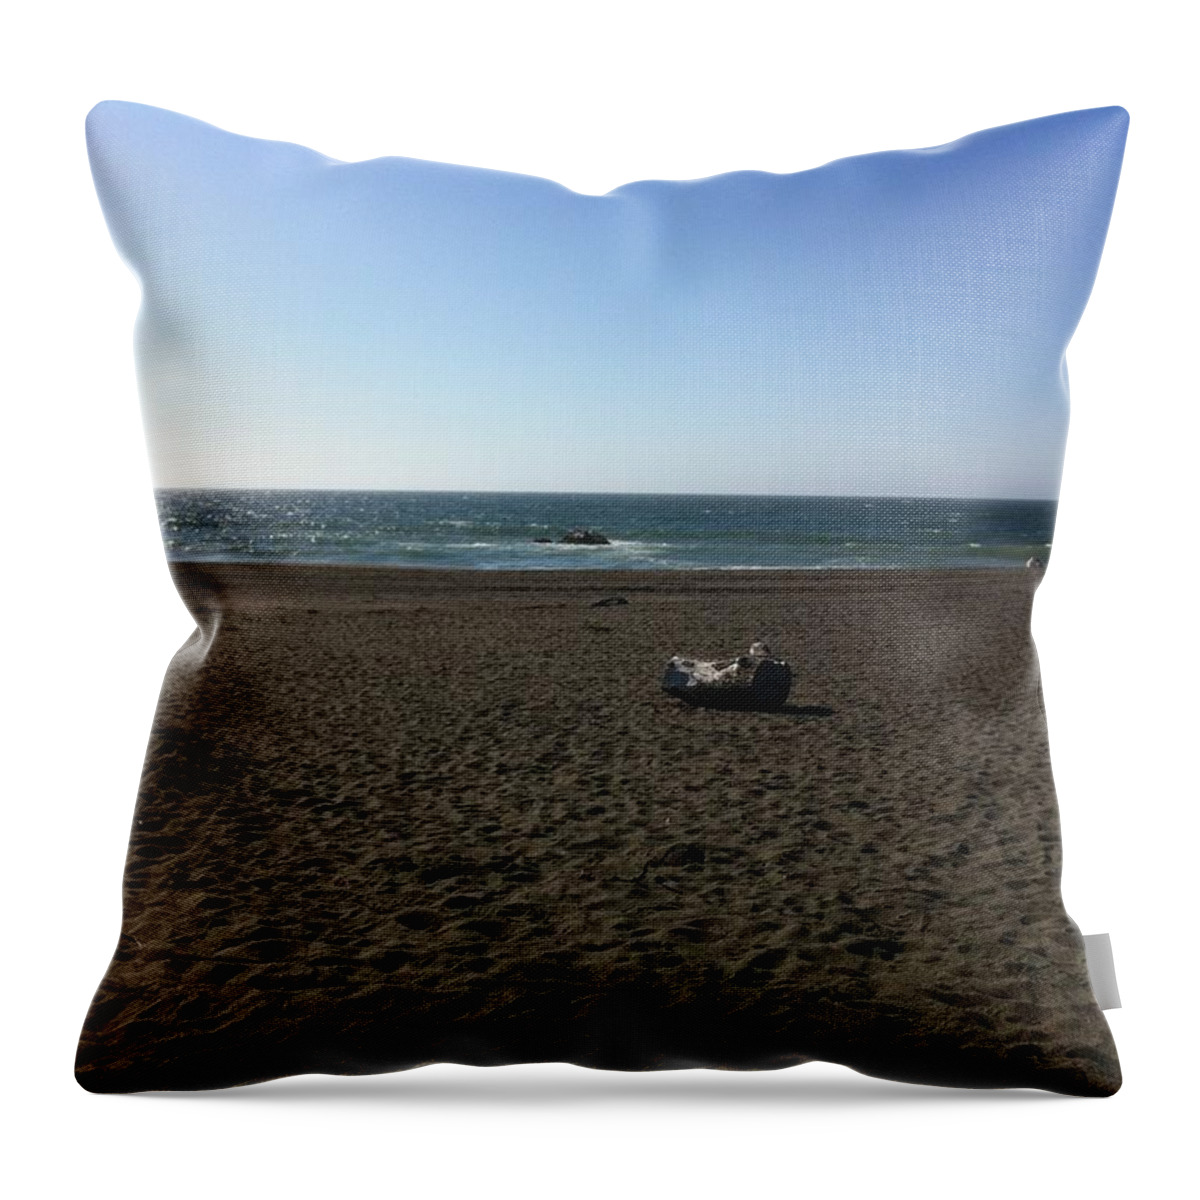 Landscape Throw Pillow featuring the photograph Solitary Log by Zach Lyon